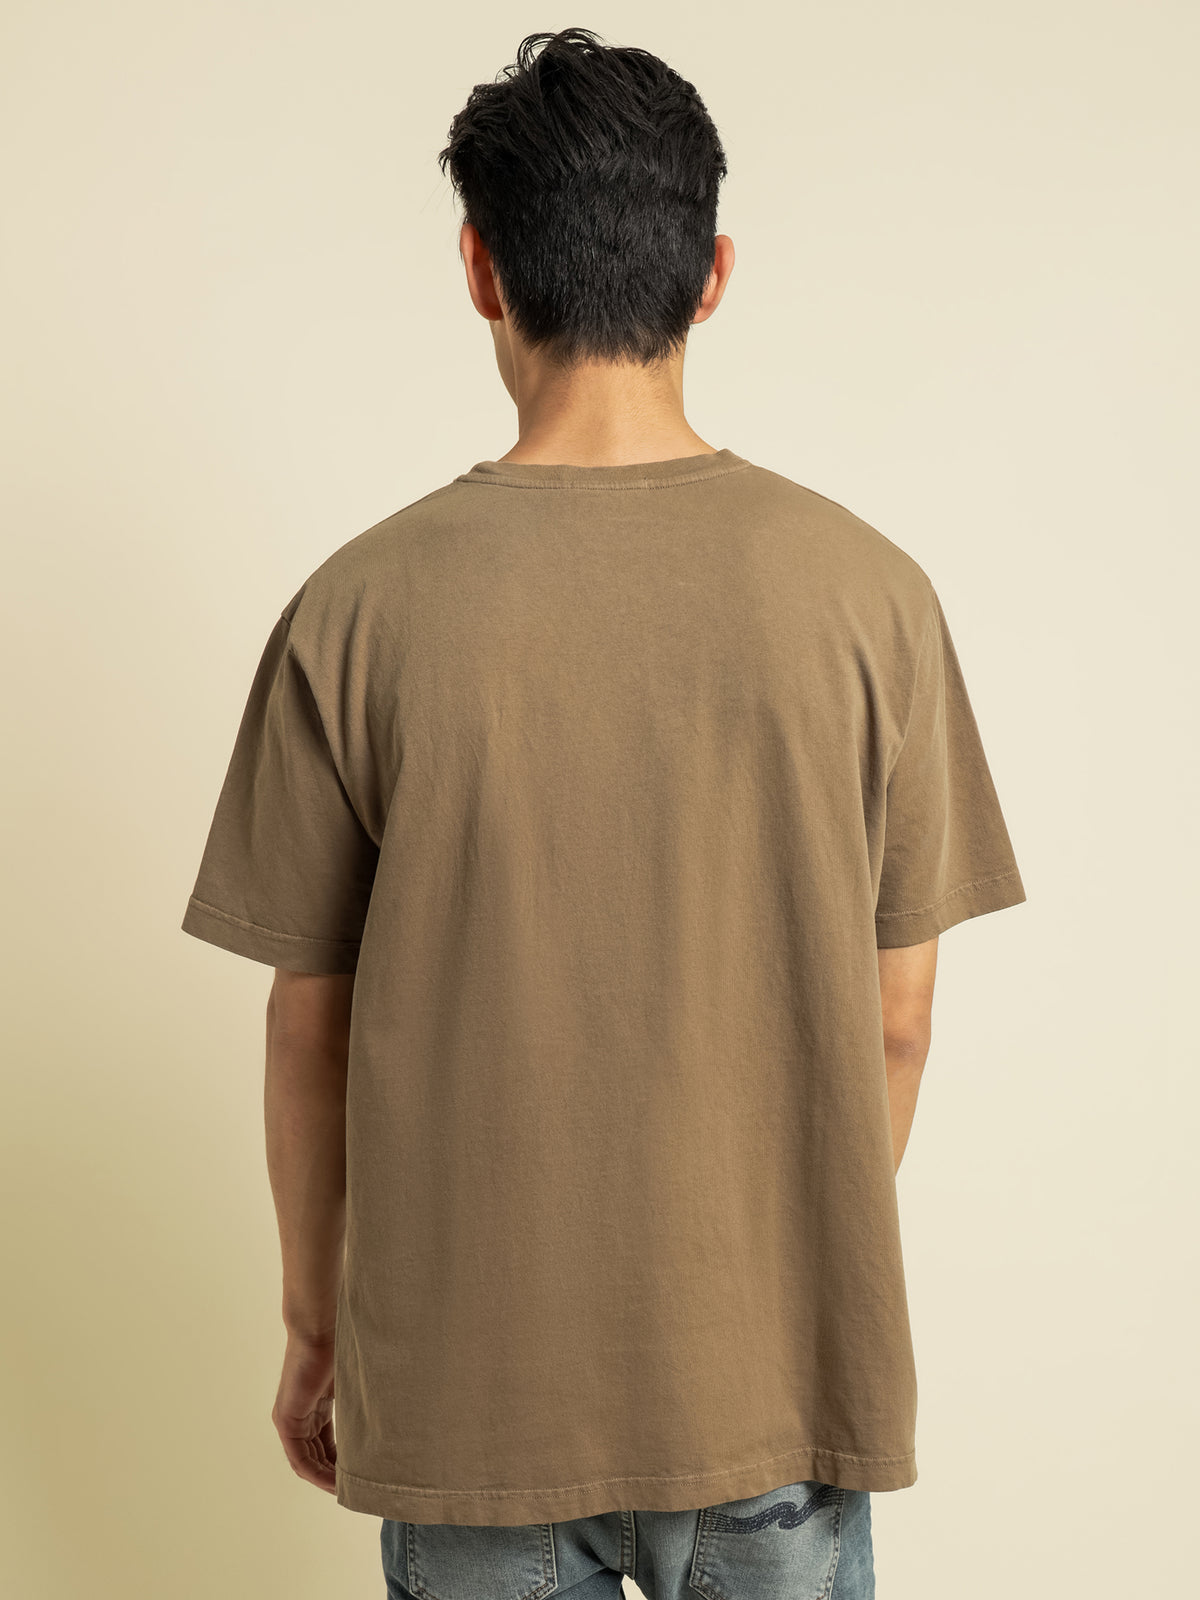 Uno NJCO Circle T-Shirt in Brown